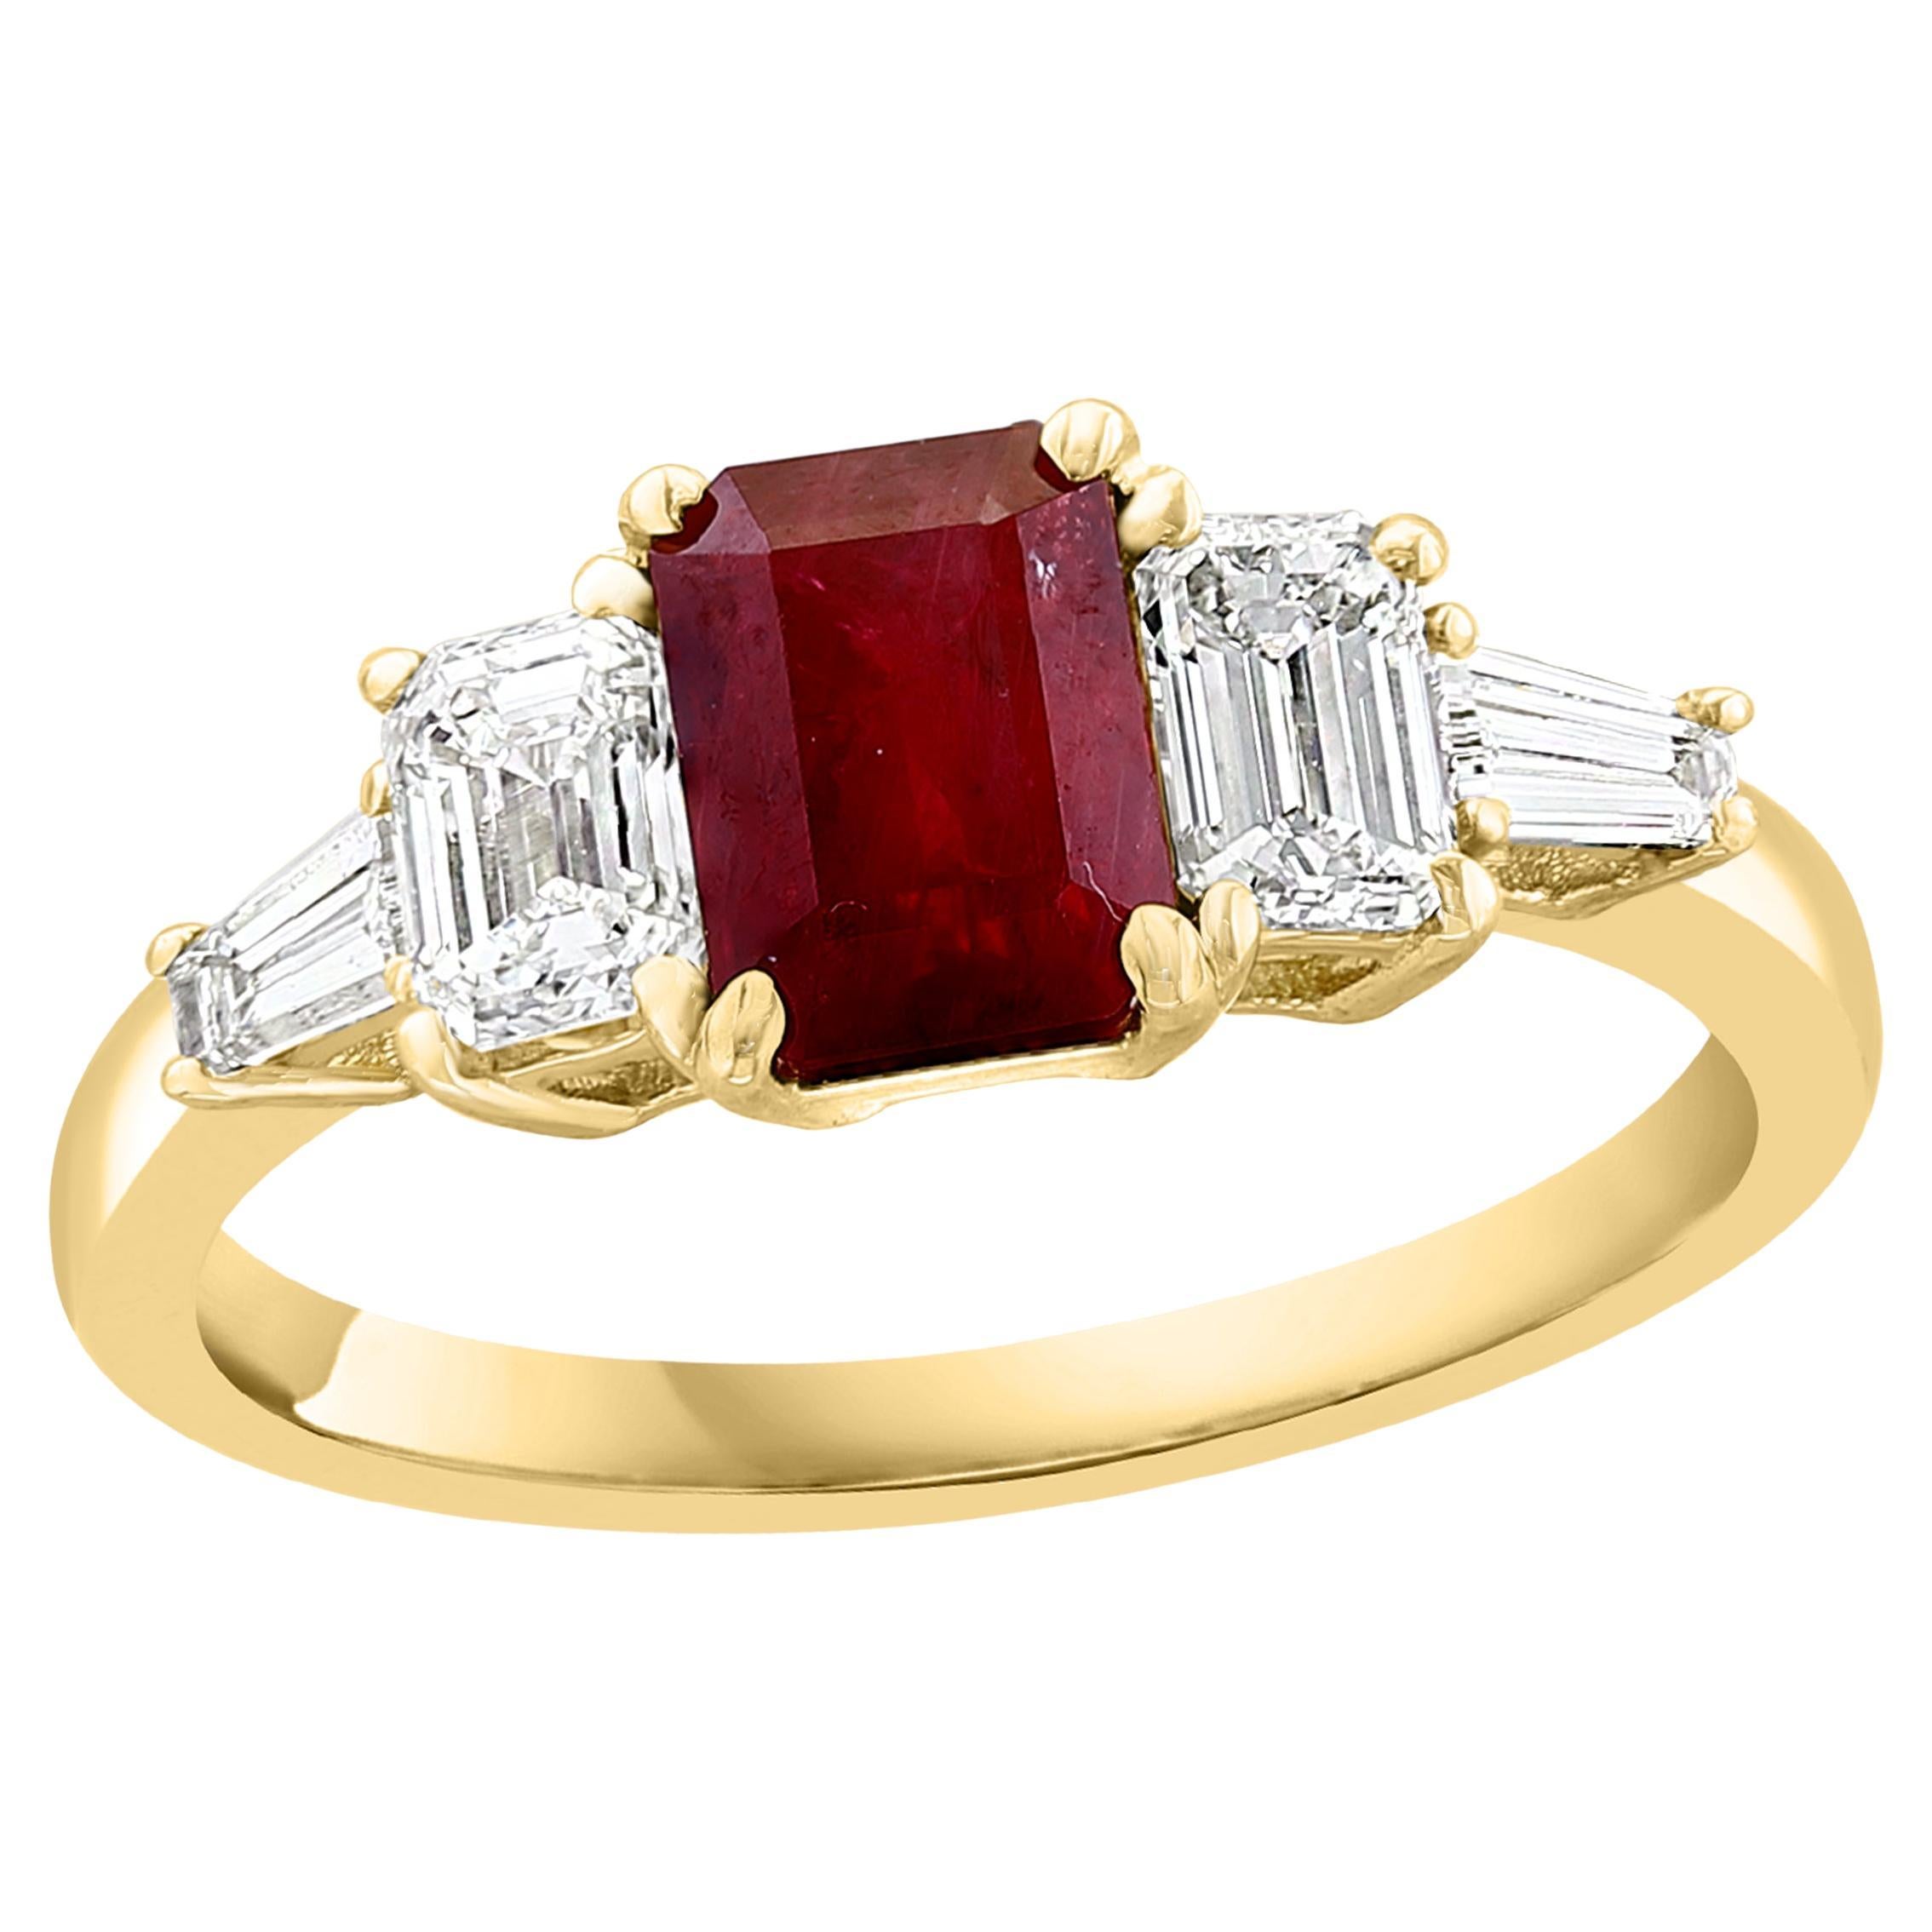 1.04 Carat Emerald Cut Ruby and Diamond 5 Stone Ring in 14K Yellow Gold